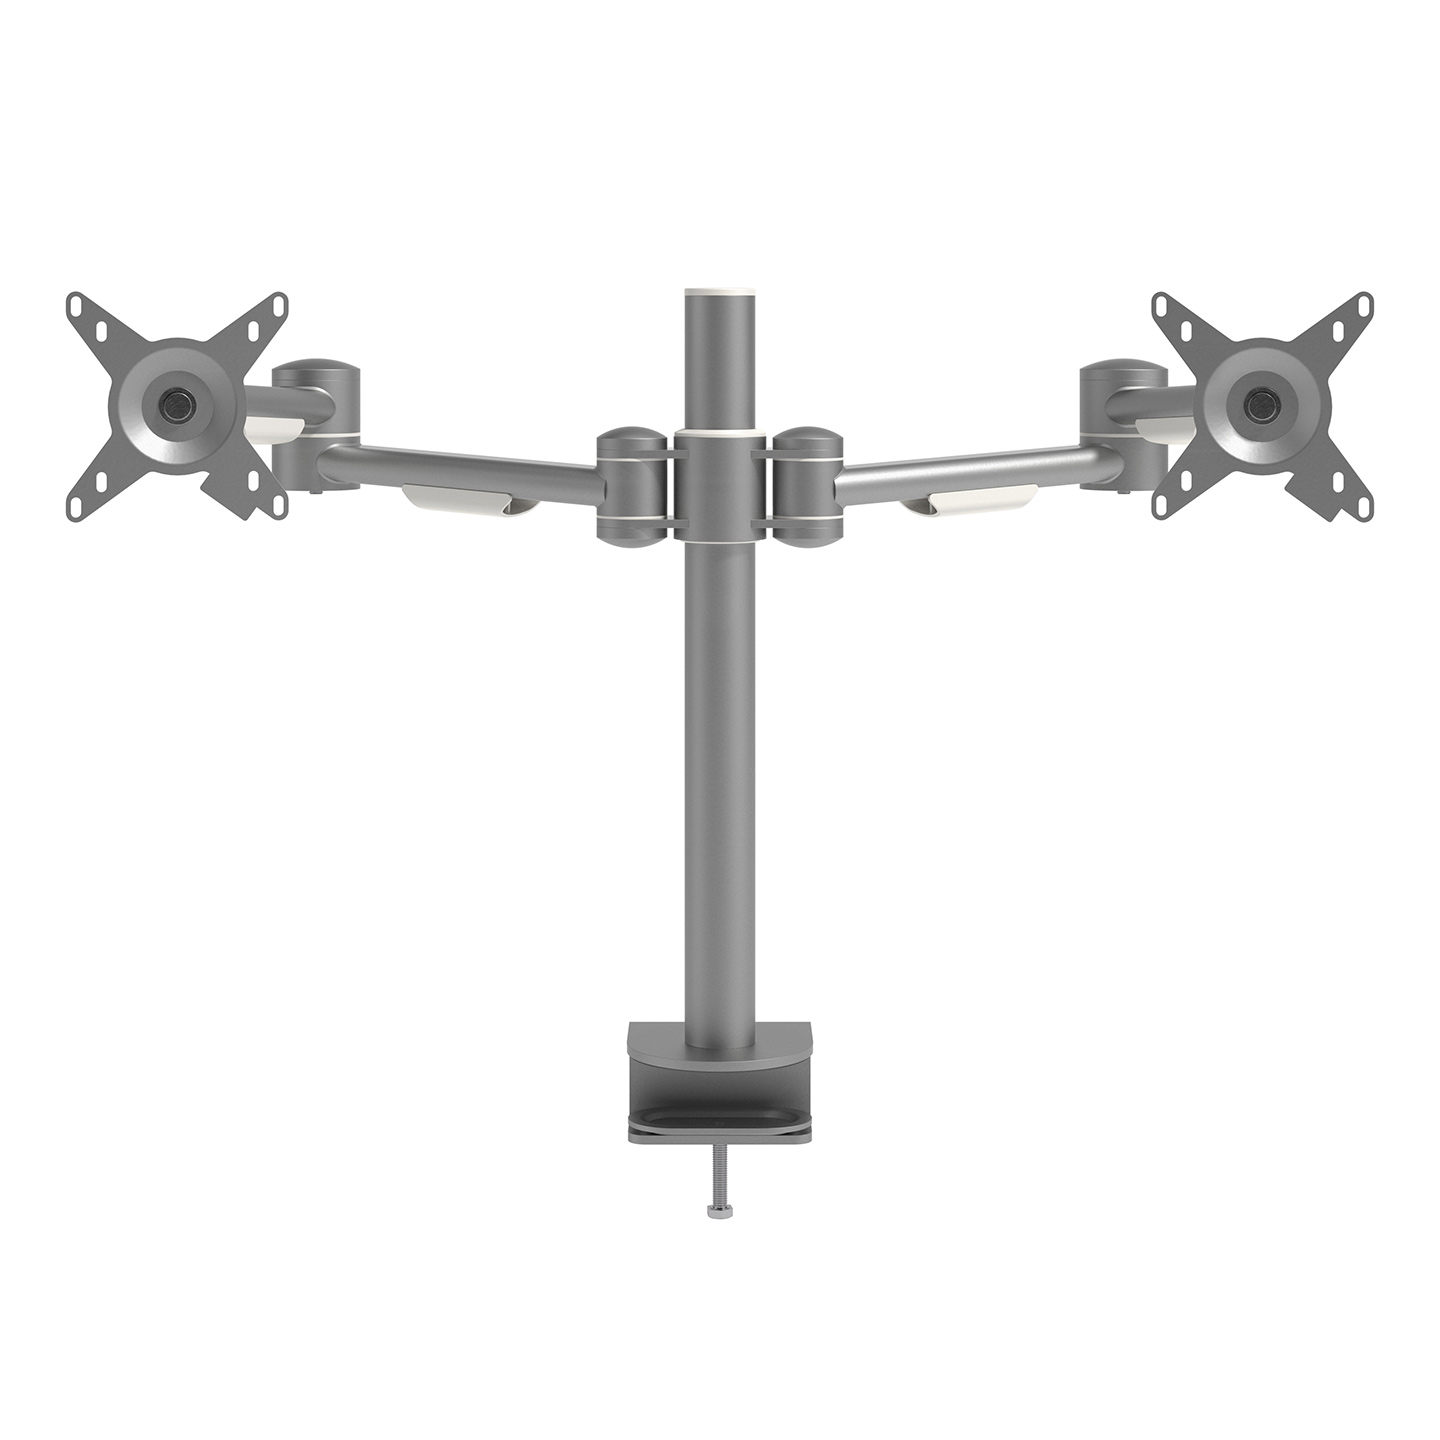 Viewmate monitor arm - desk 632